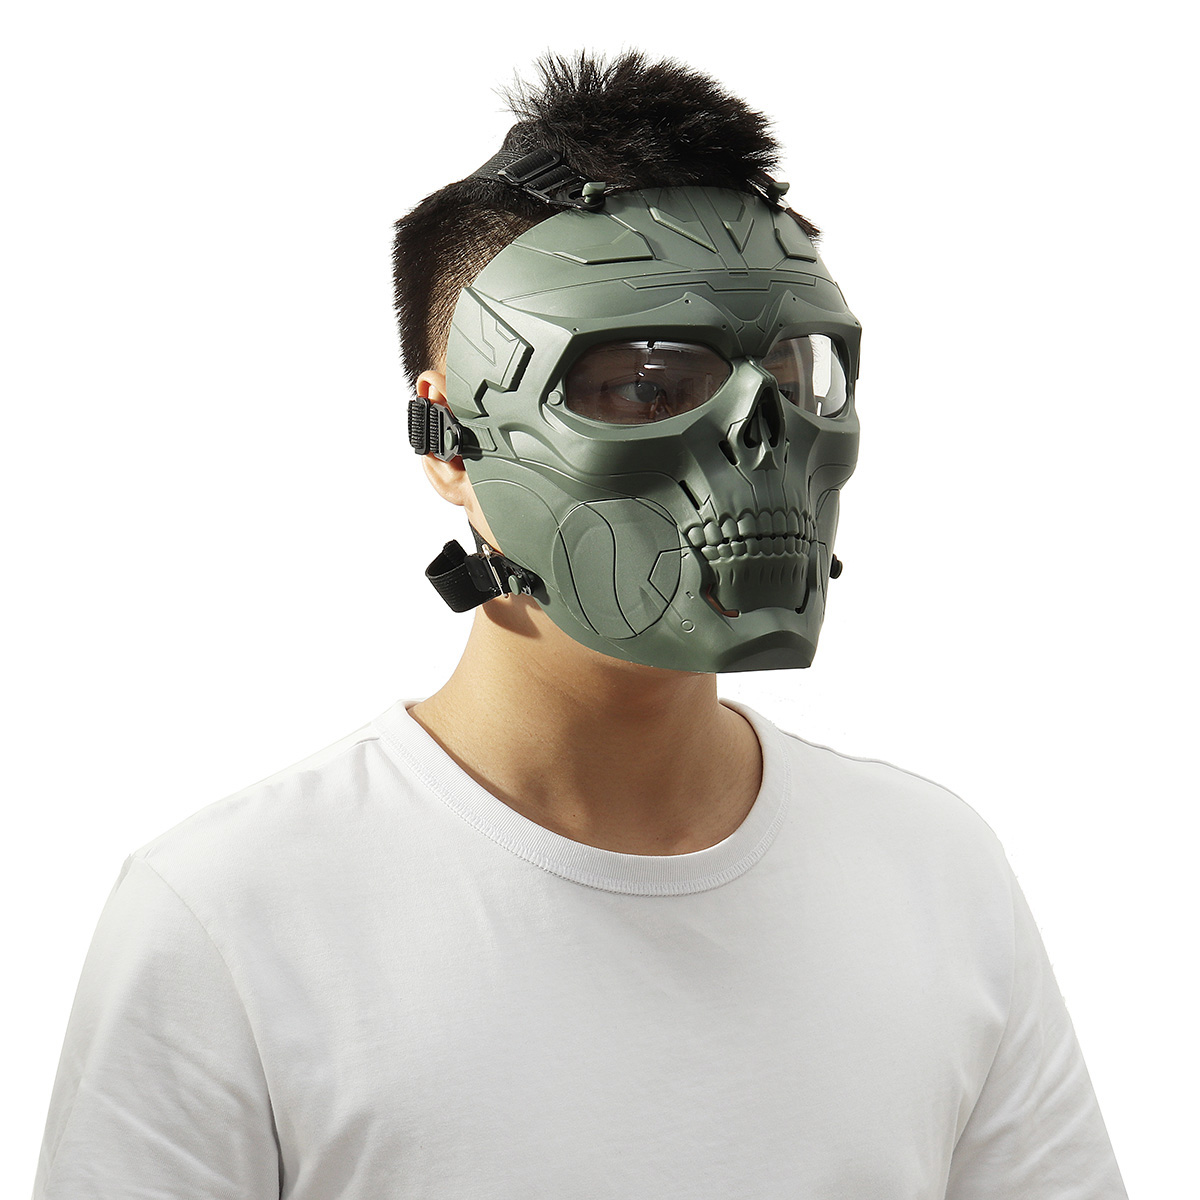 Halloween Prom Mask Paintball Masks Full Face Skull Mask Tactical For Wildfire Actical